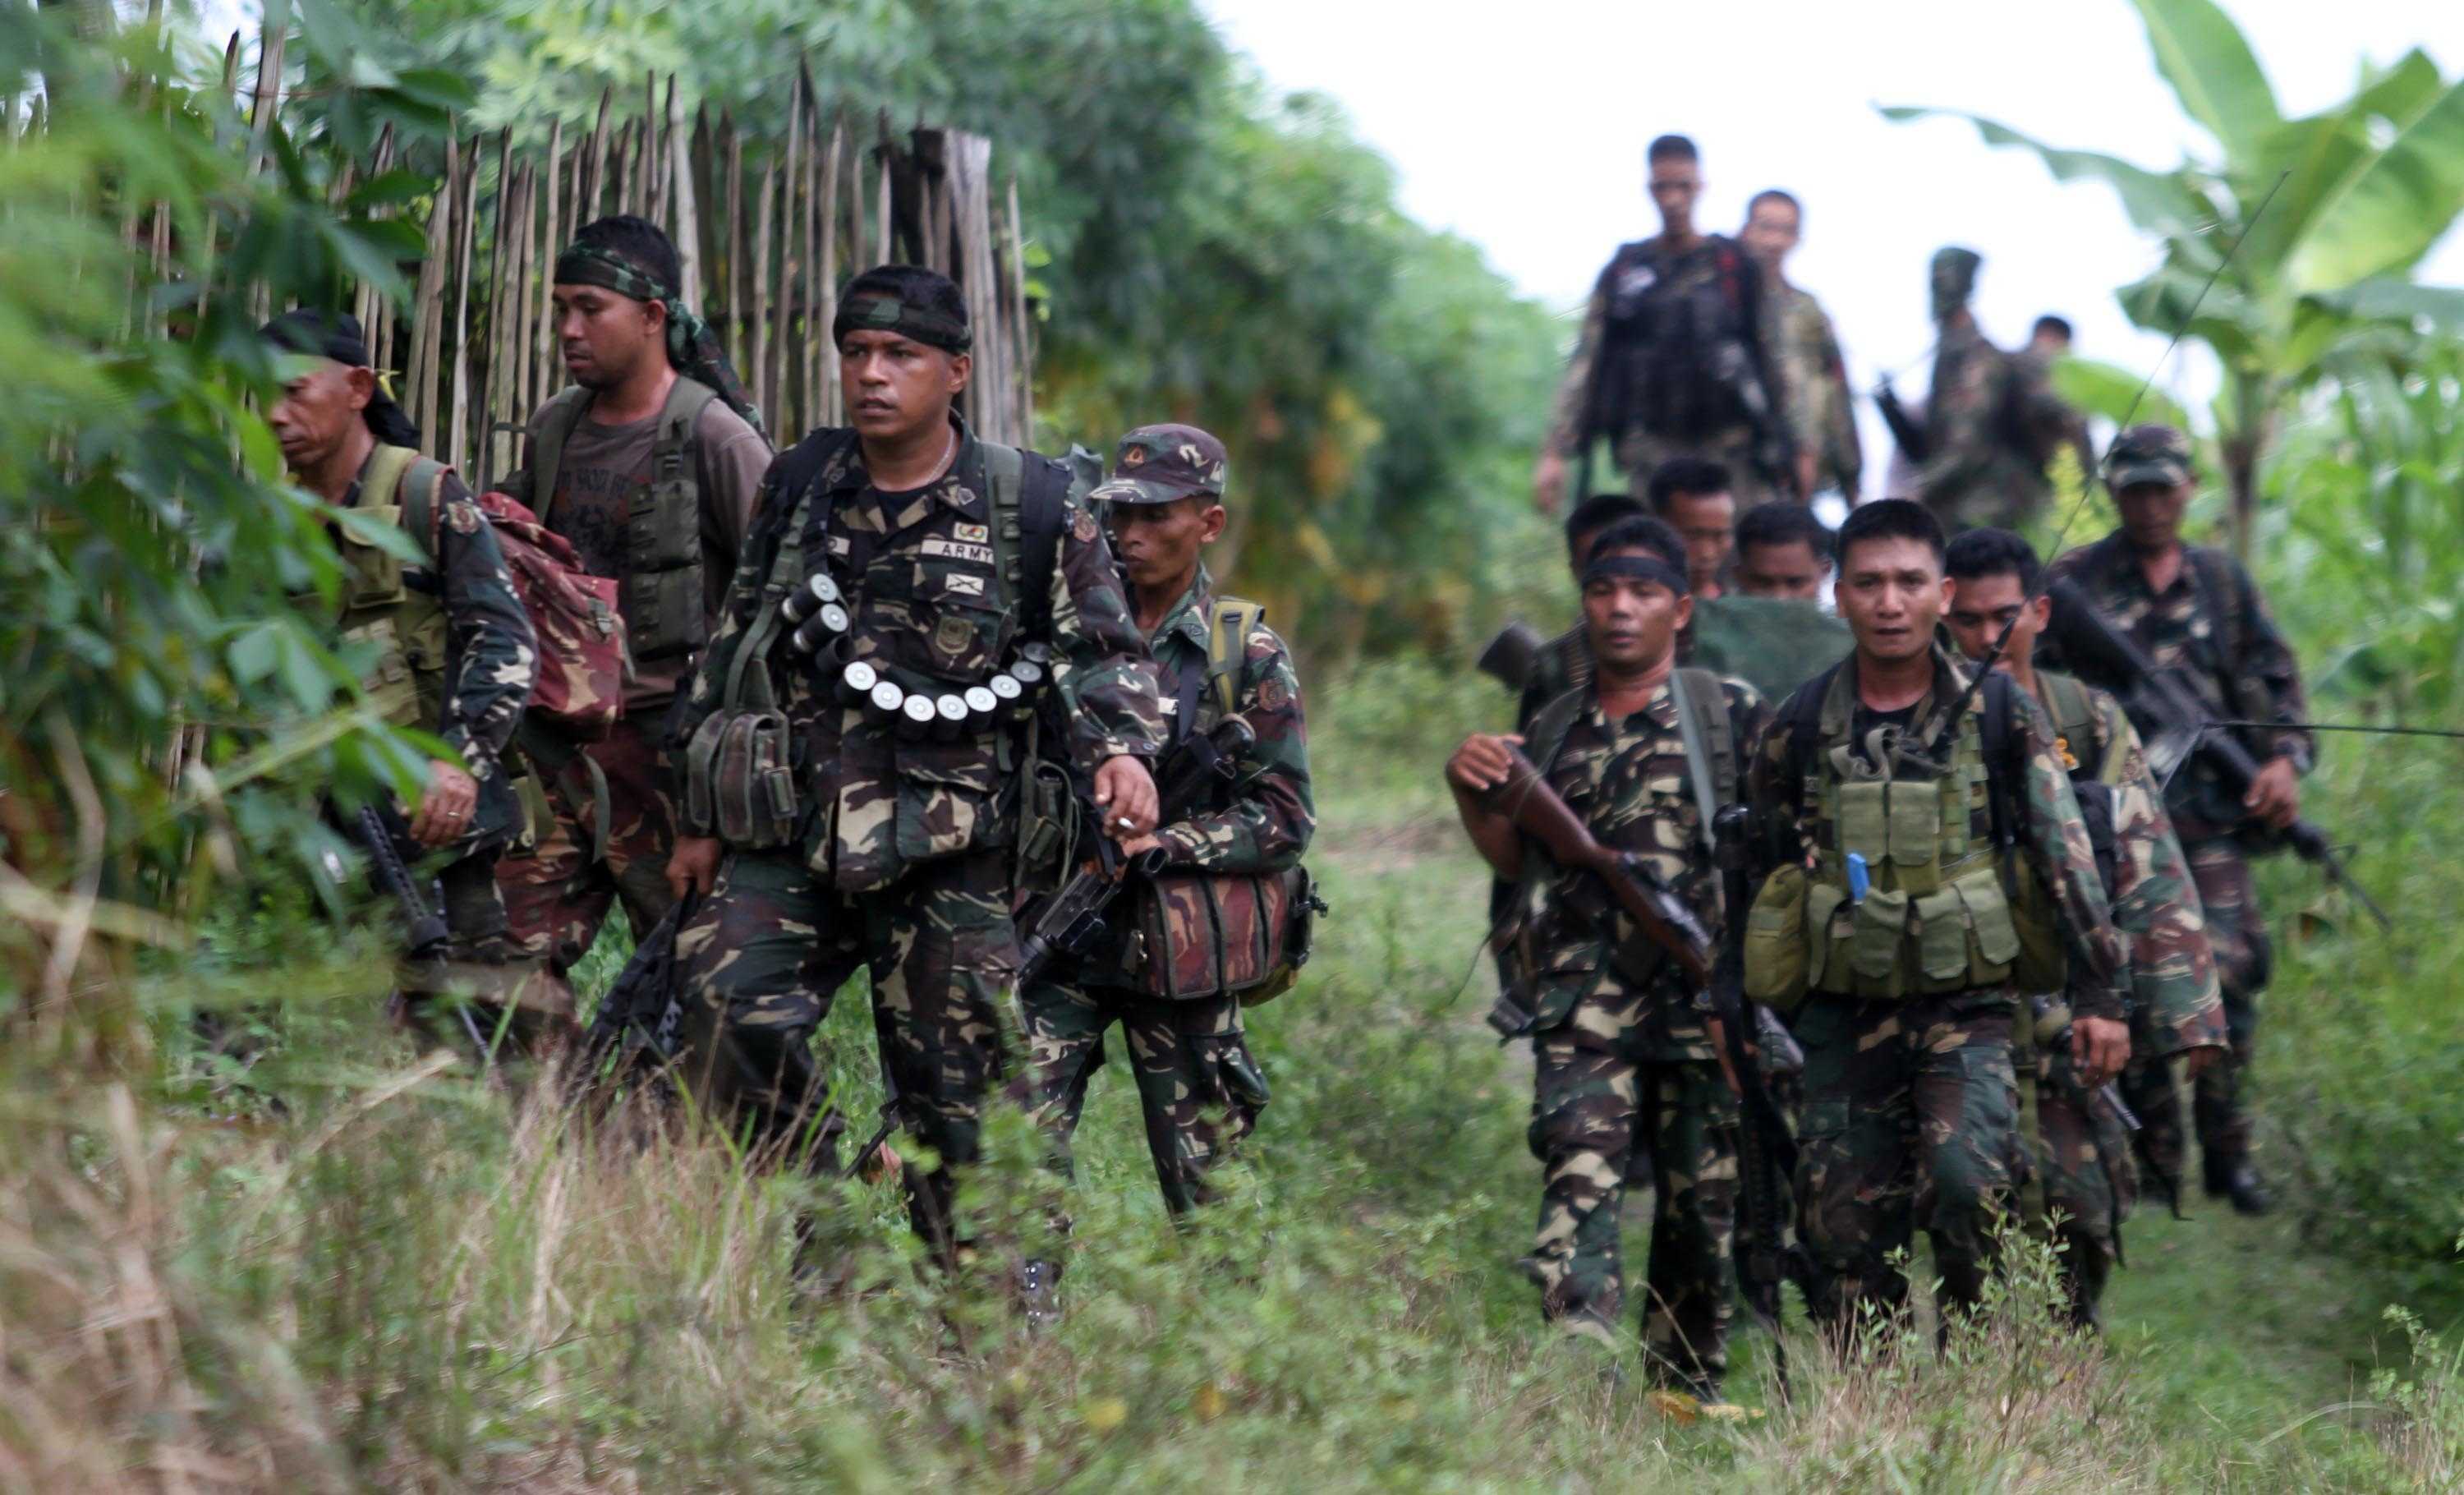 Philippines general claims to be 'winning peace' against rebels